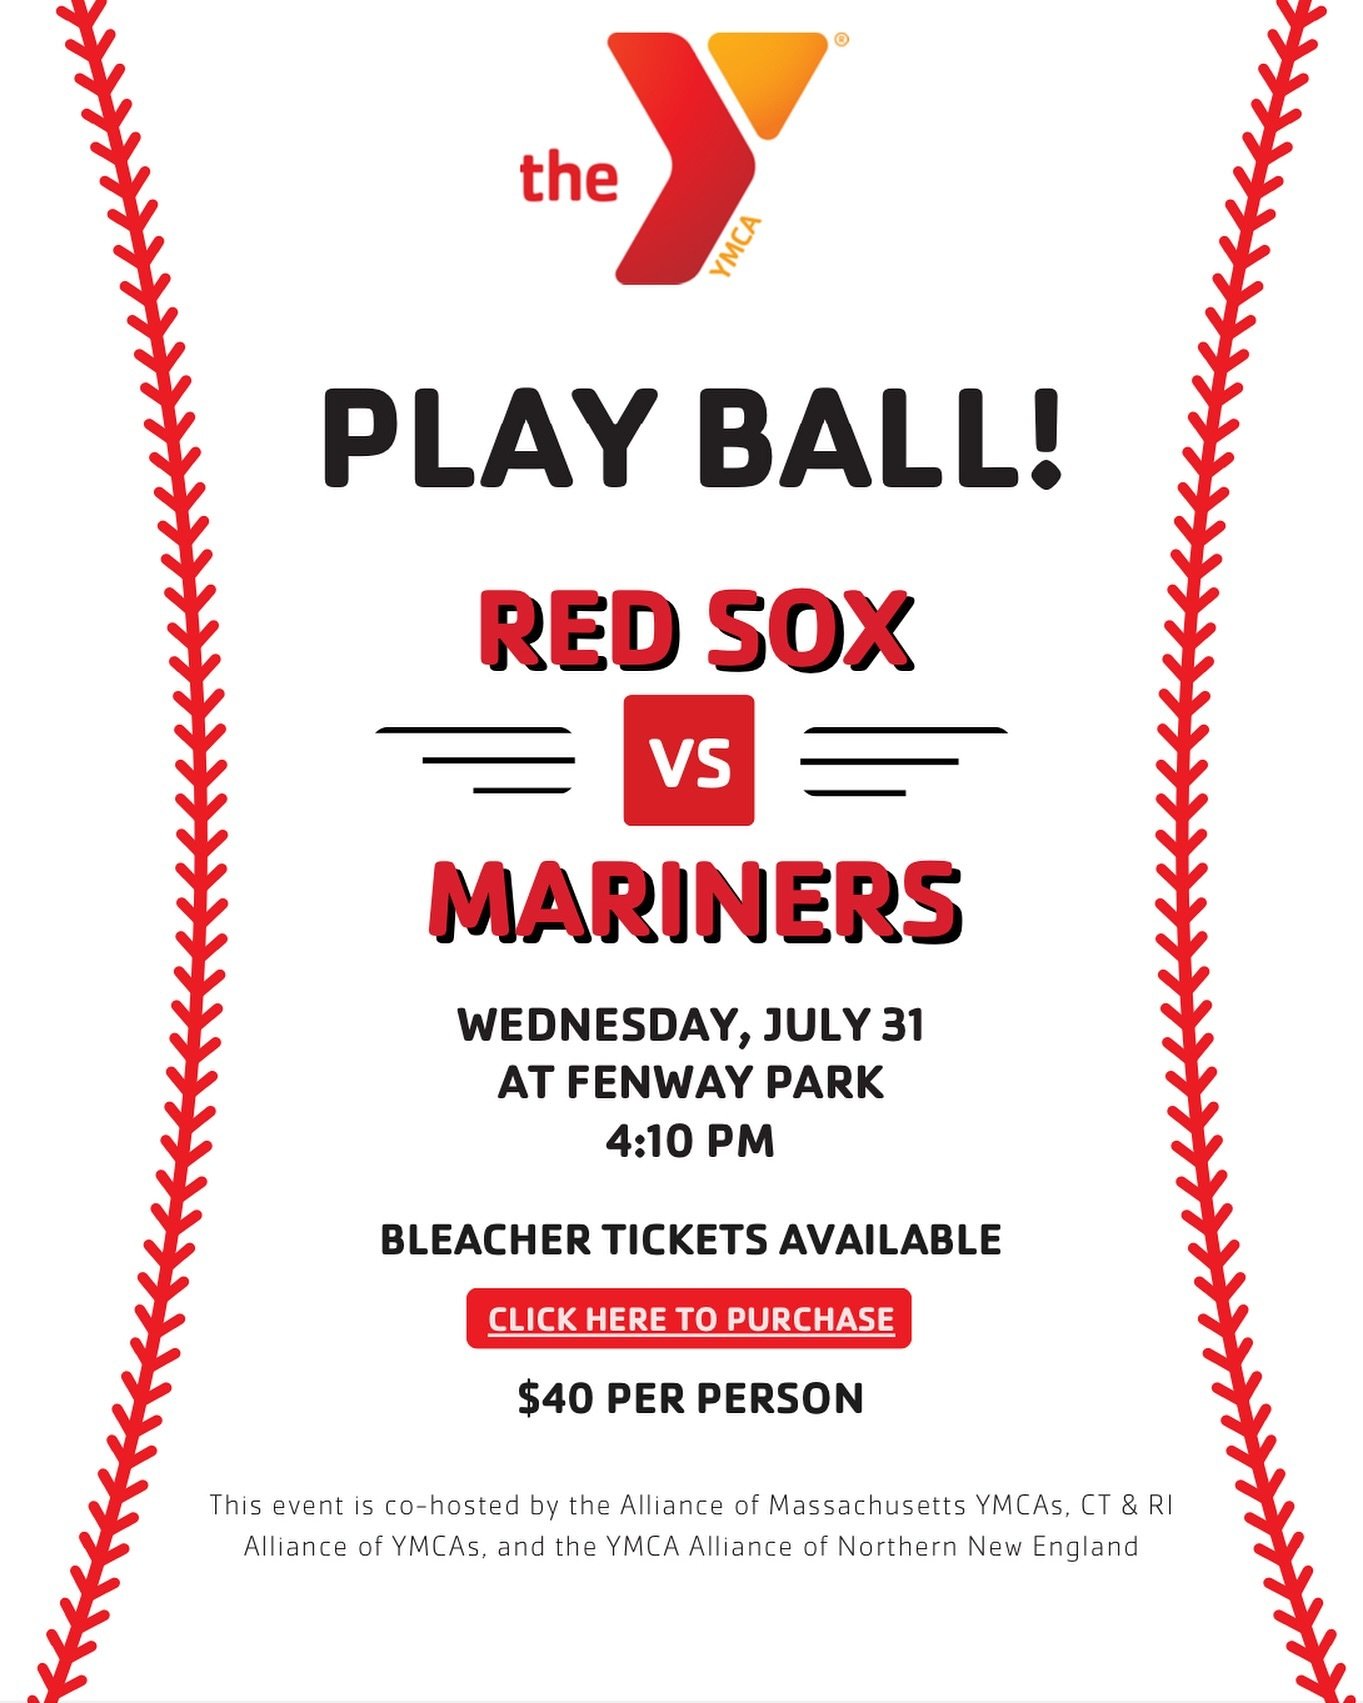 Join us on July 31 at Fenway Park! YMCA Associations in New England are invited to purchase tickets to enjoy a fun Y Day at Fenway this summer. 

Thank you to the @redsox for continuing this exciting partnership⚾️❤️